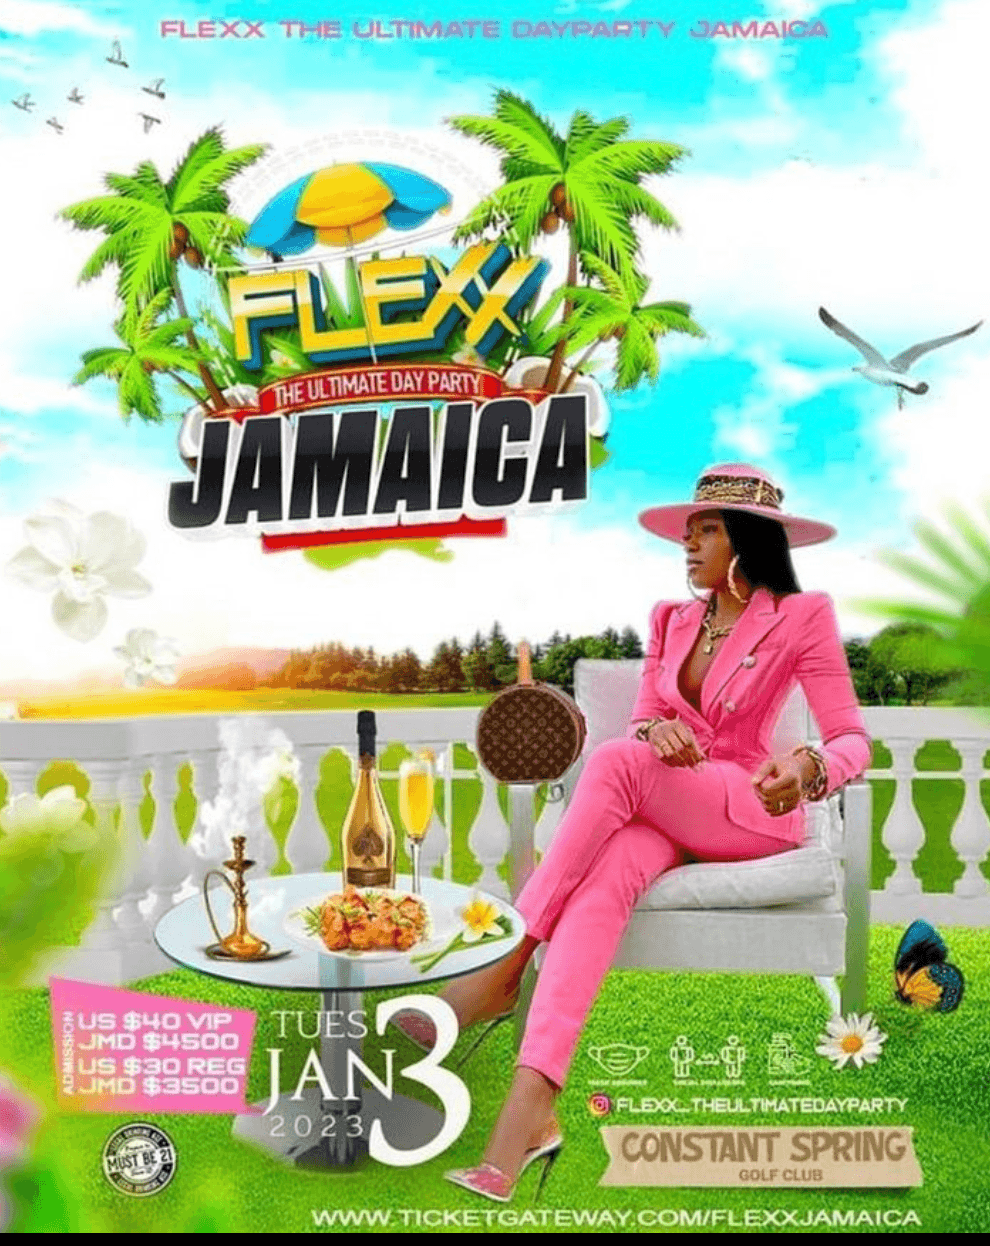 Flexx The Ultimate Day Party